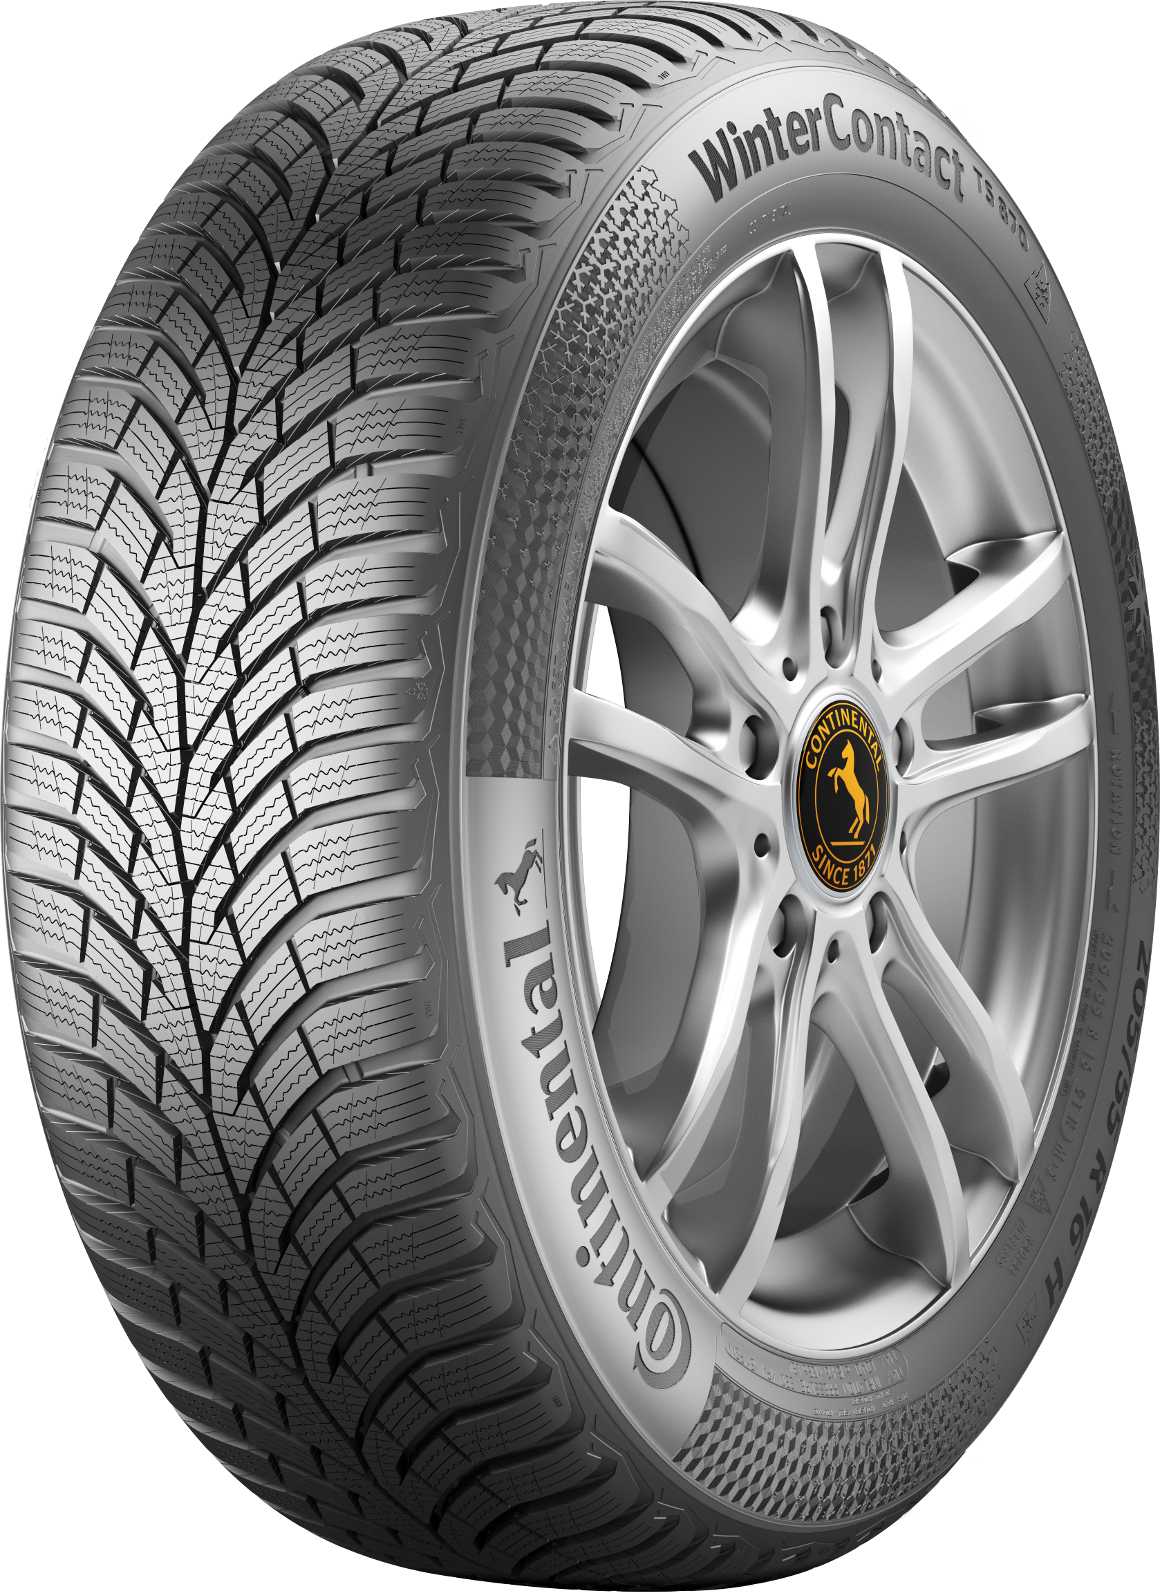    Continental Winter Contact TS870 205/65 R16 